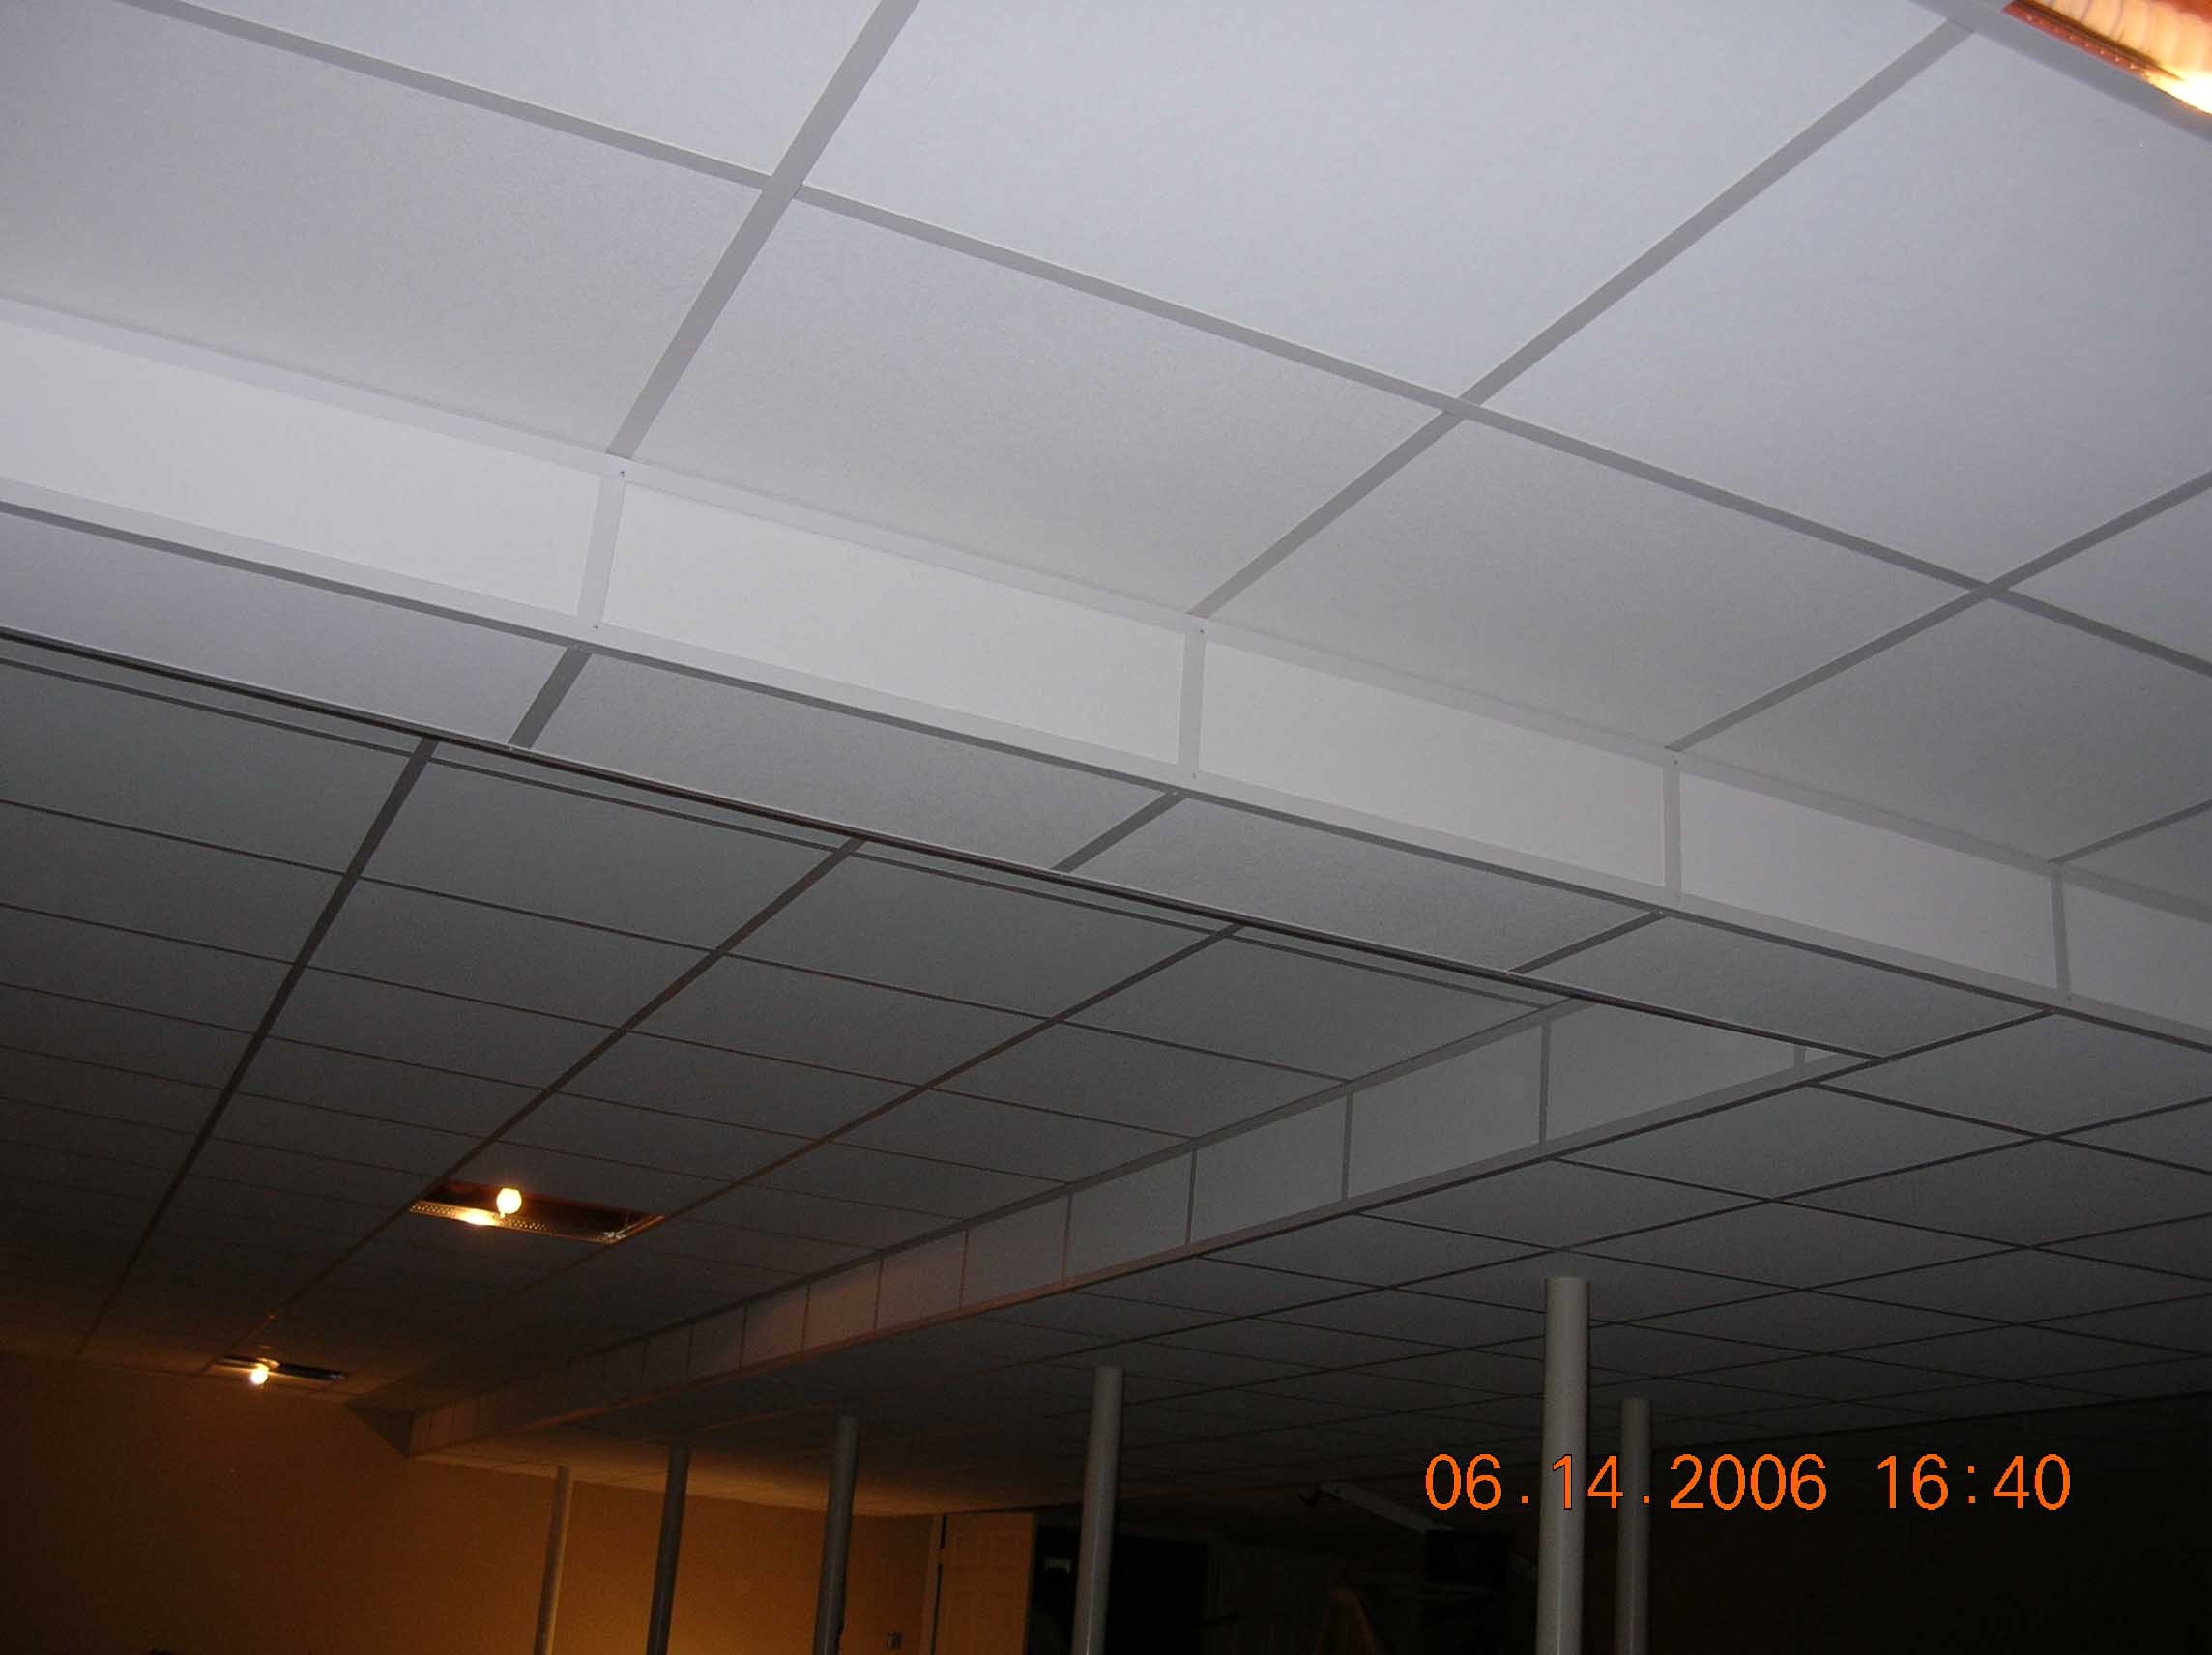 Ceiling Tiles For Low Basement